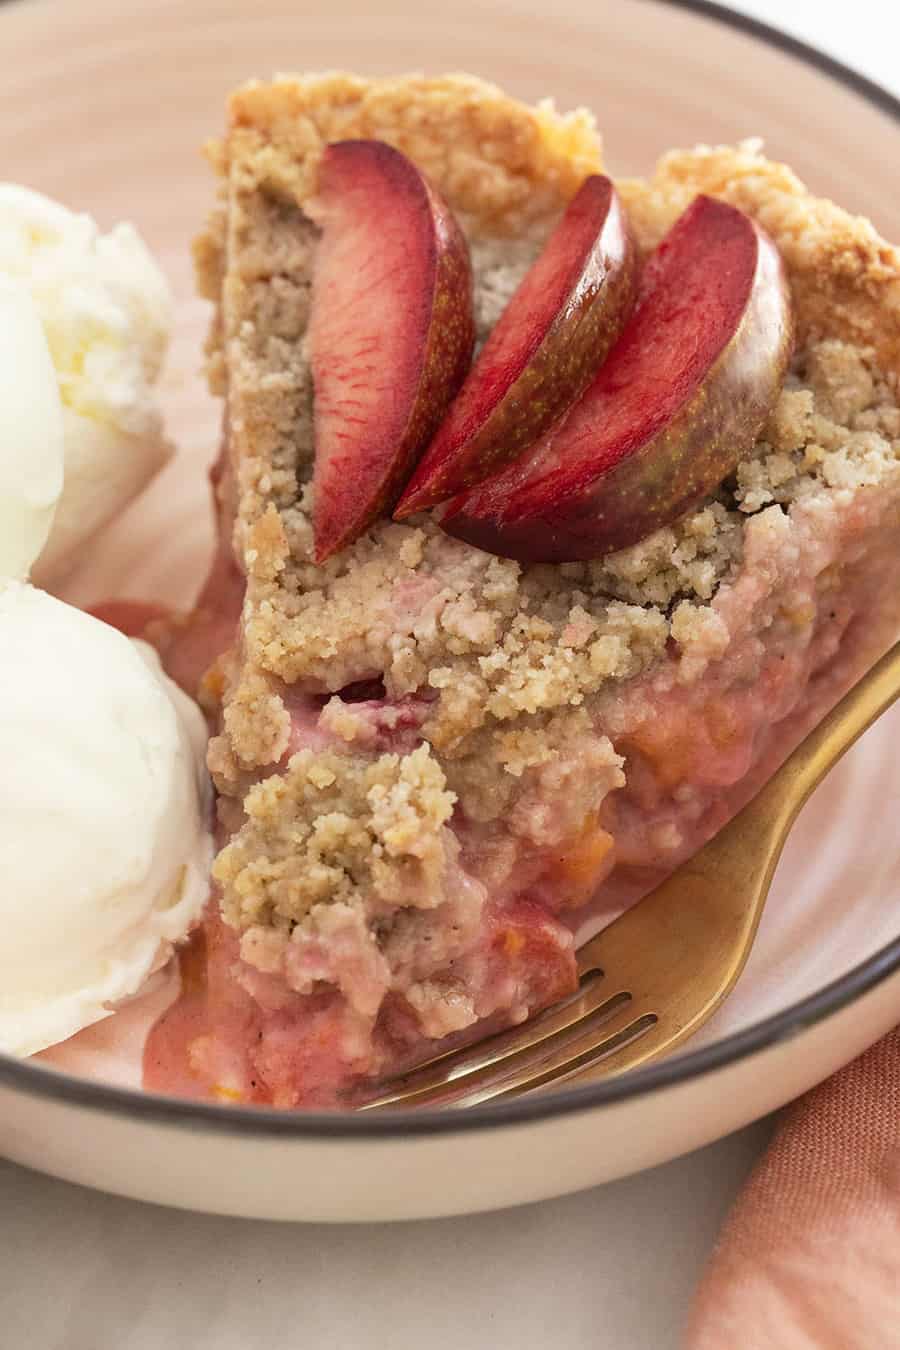 Plumcot and aprium pie with crumble top and sliced plumcots.